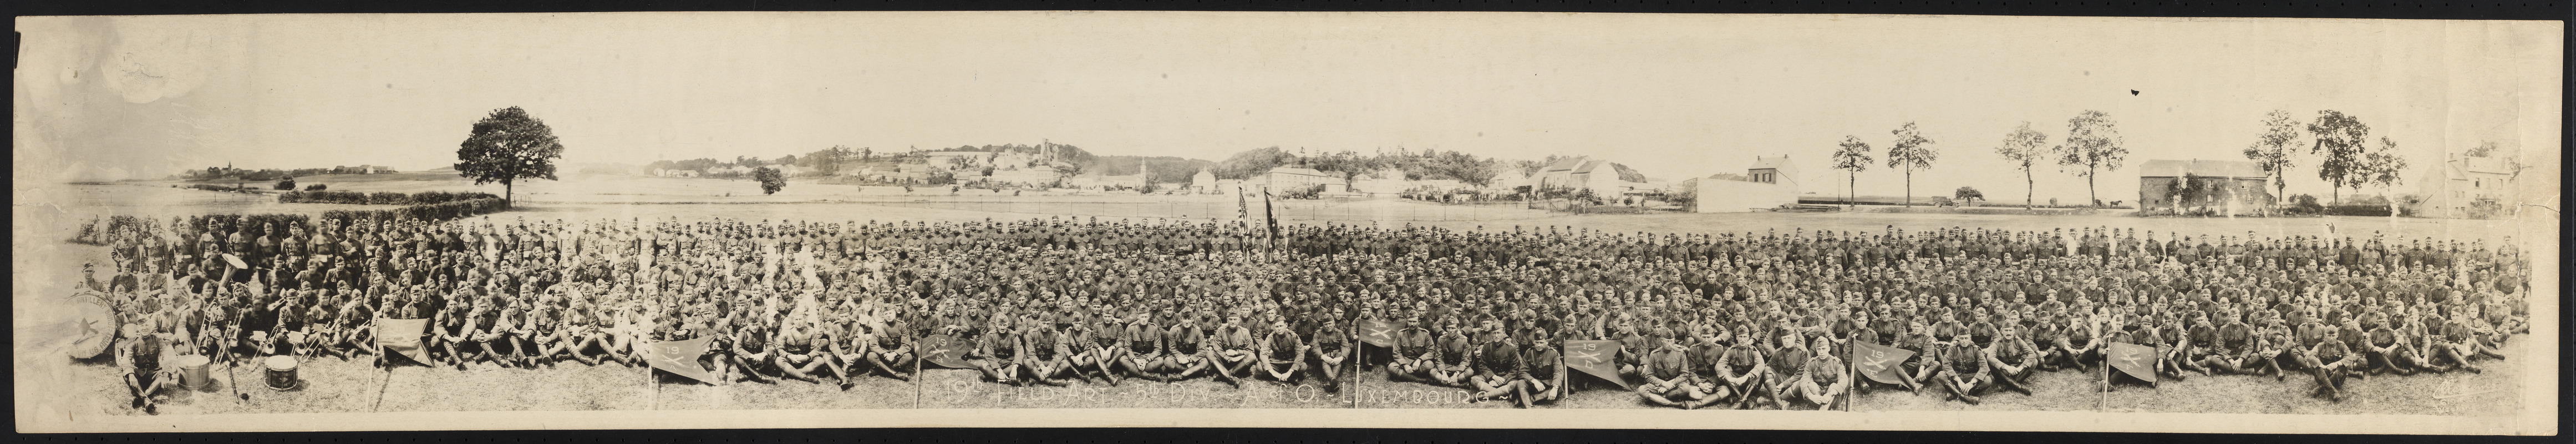 19th Field Artillery, 5th Division, A. of O. - Luxembourg